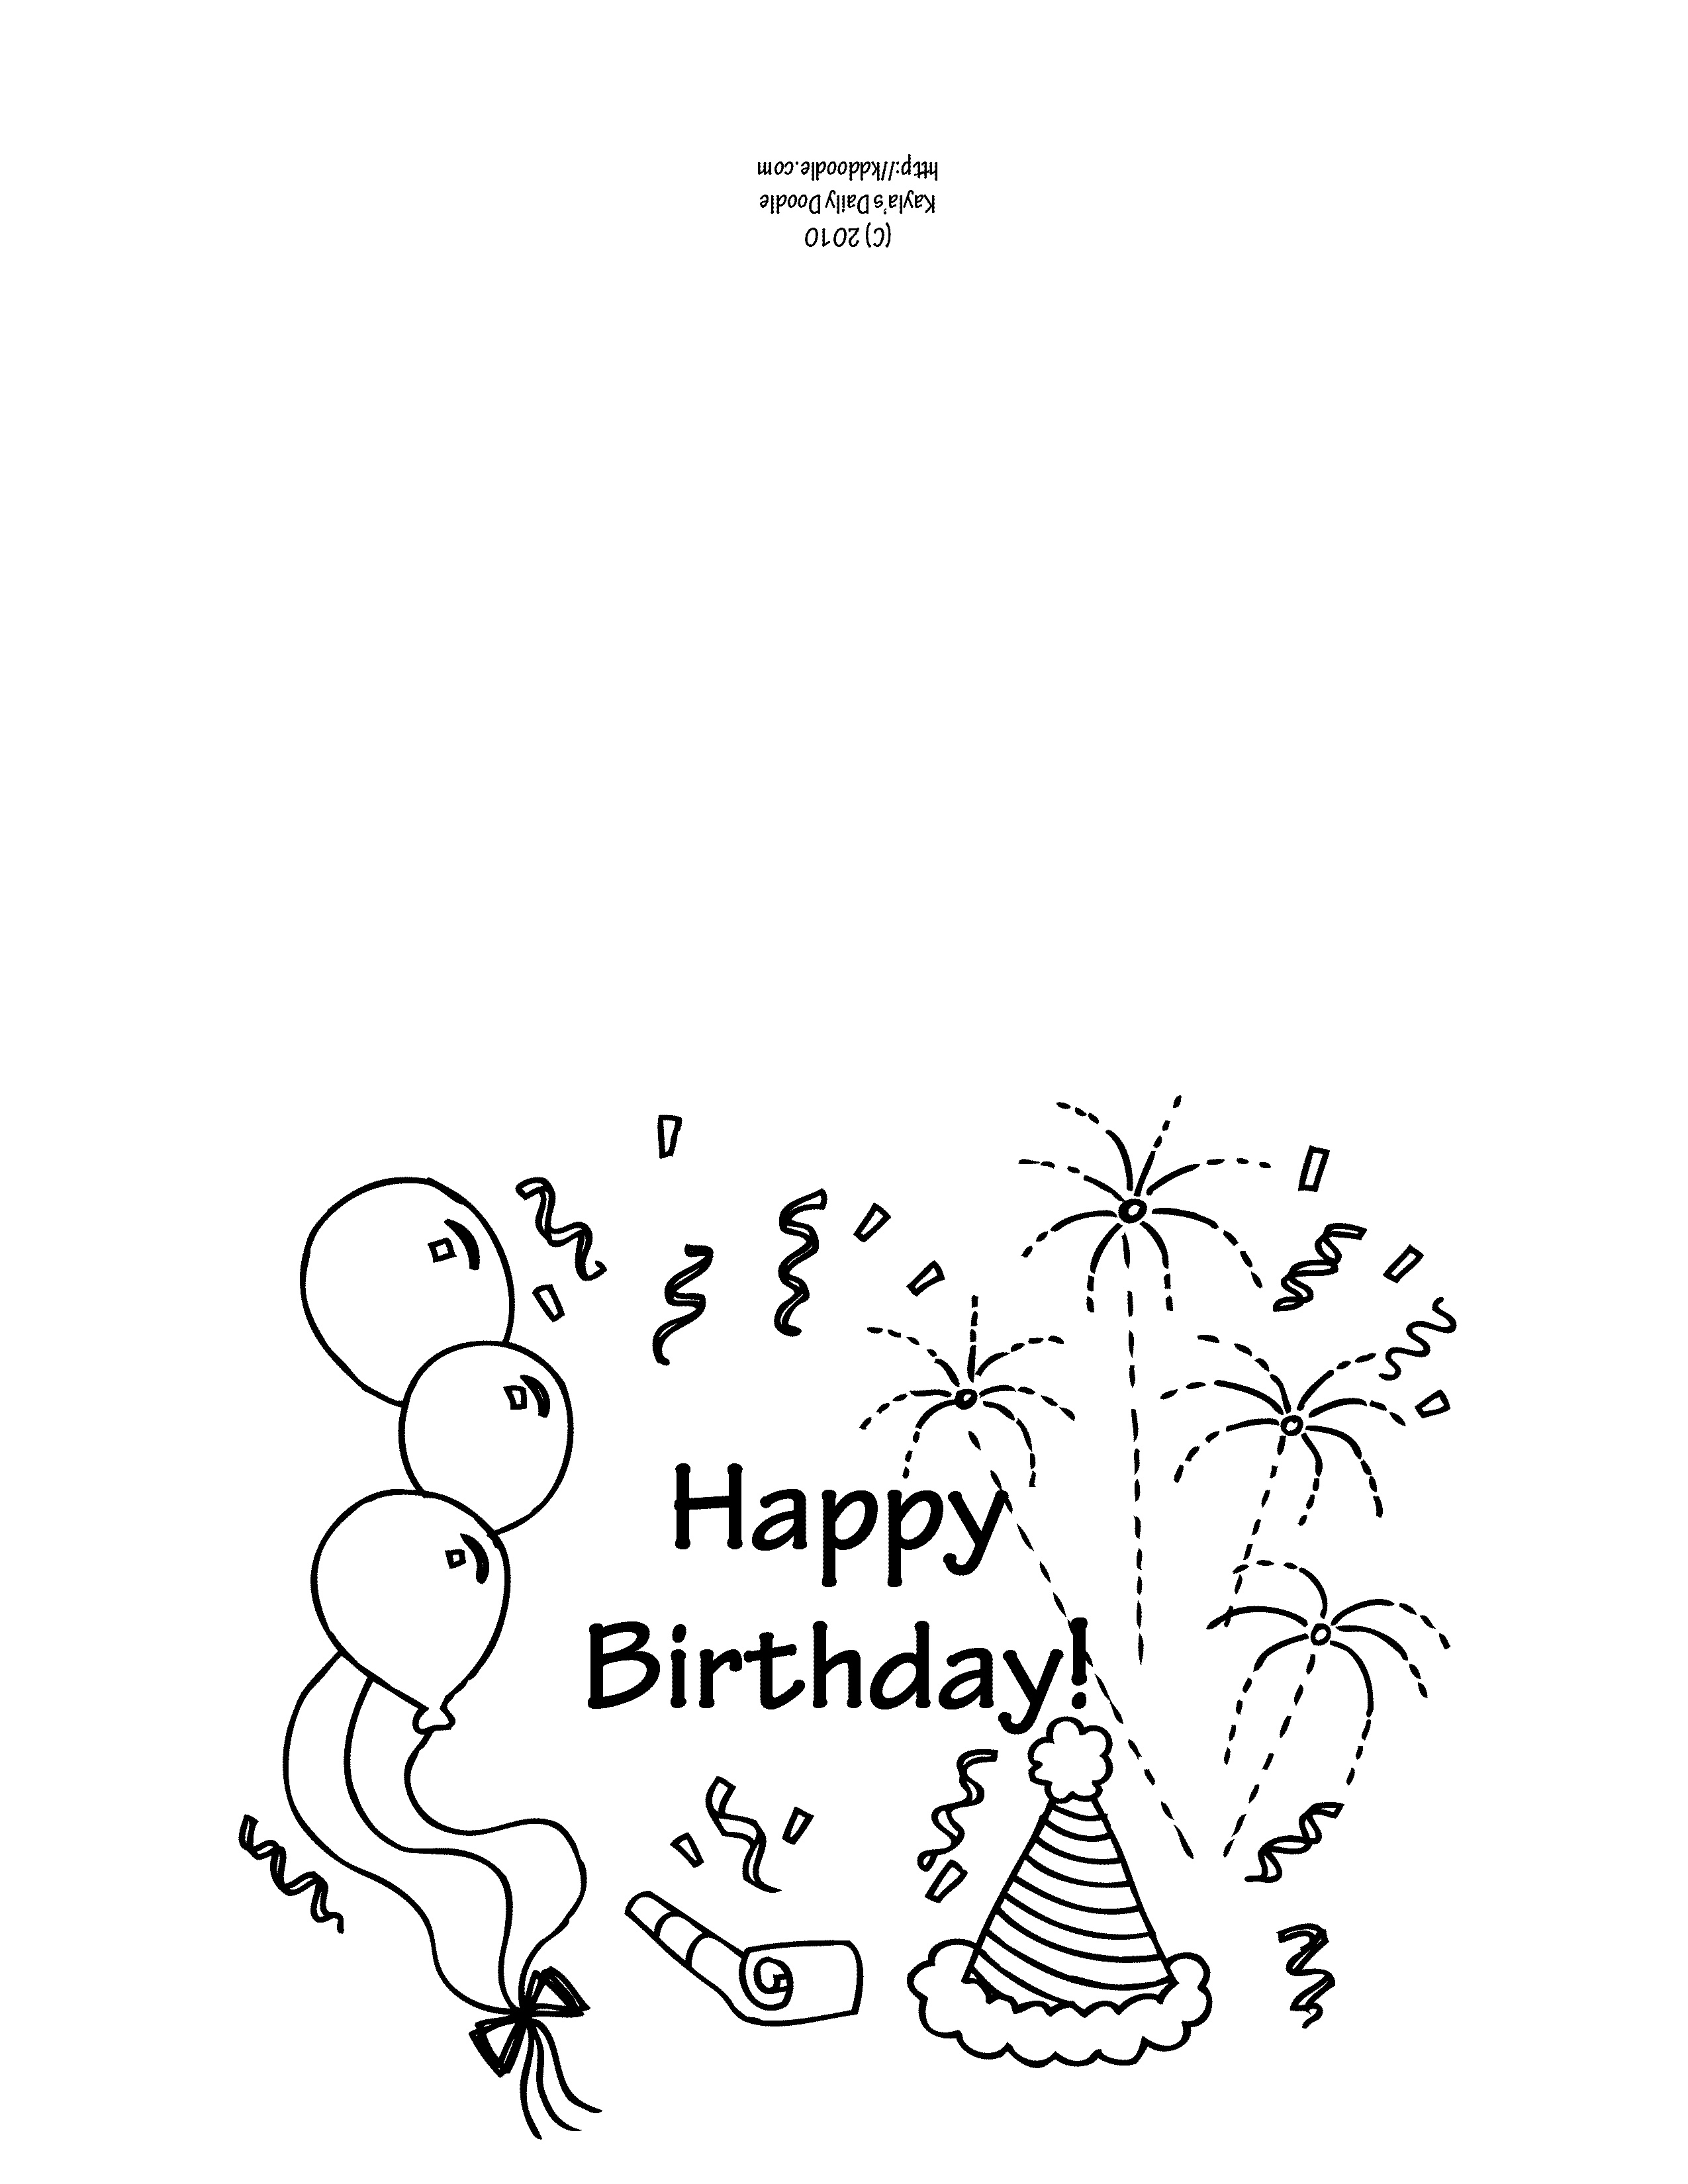 Free Printable Birthday Cards To Color (65+ Images In Collection) Page 2 - Free Printable Birthday Cards To Color